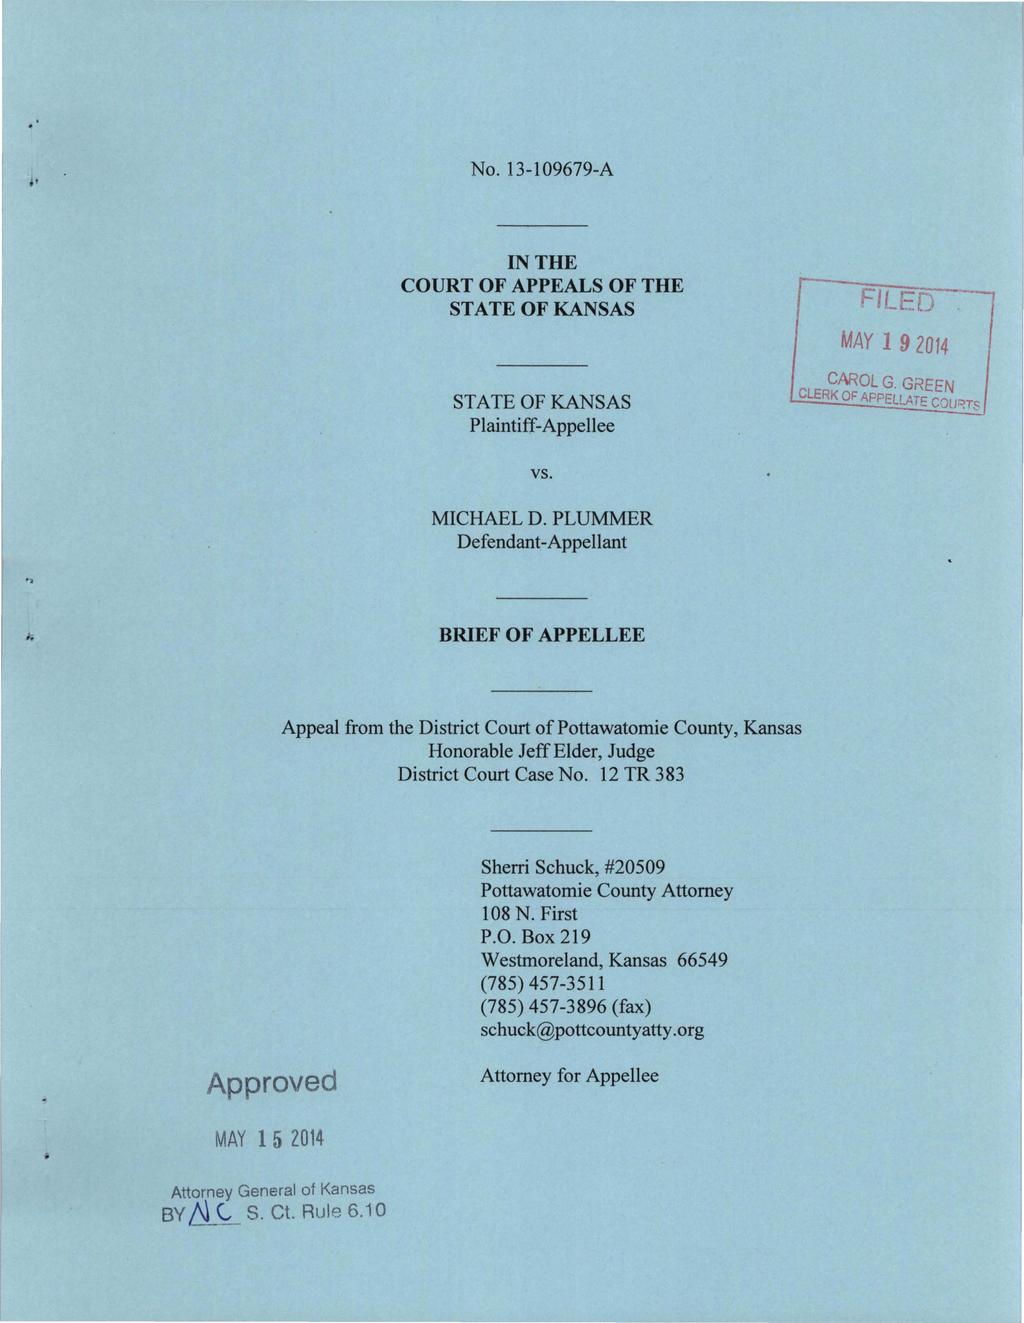 No. 13-109679-A IN THE COURT OF APPEALS OF THE STATE OF KANSAS STATE OF KANSAS Plaintiff-Appellee Fit t-n -l MAY 1-;~~'4. CAROL G. GREEN CLERK Or: APPELLATE COLJ~n; vs. MICHAEL D.